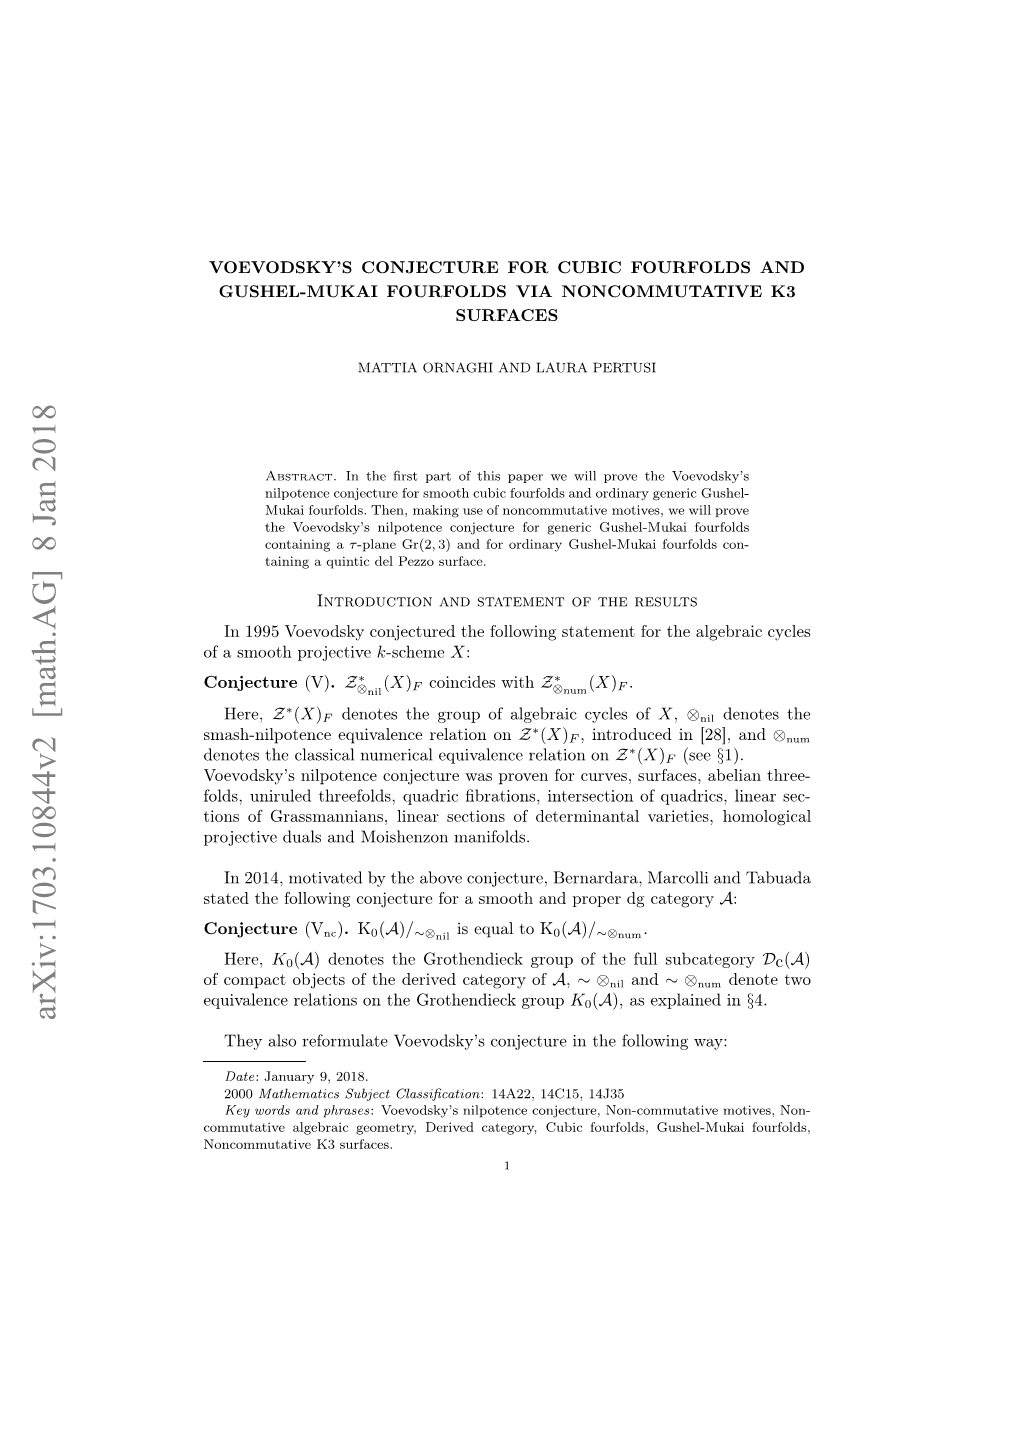 Arxiv:1703.10844V2 [Math.AG] 8 Jan 2018 Ttdtefloigcnetr O Mohadpoe Gca Dg Proper and Smooth a for Conjecture Following the Stated V Determinantal Manifolds